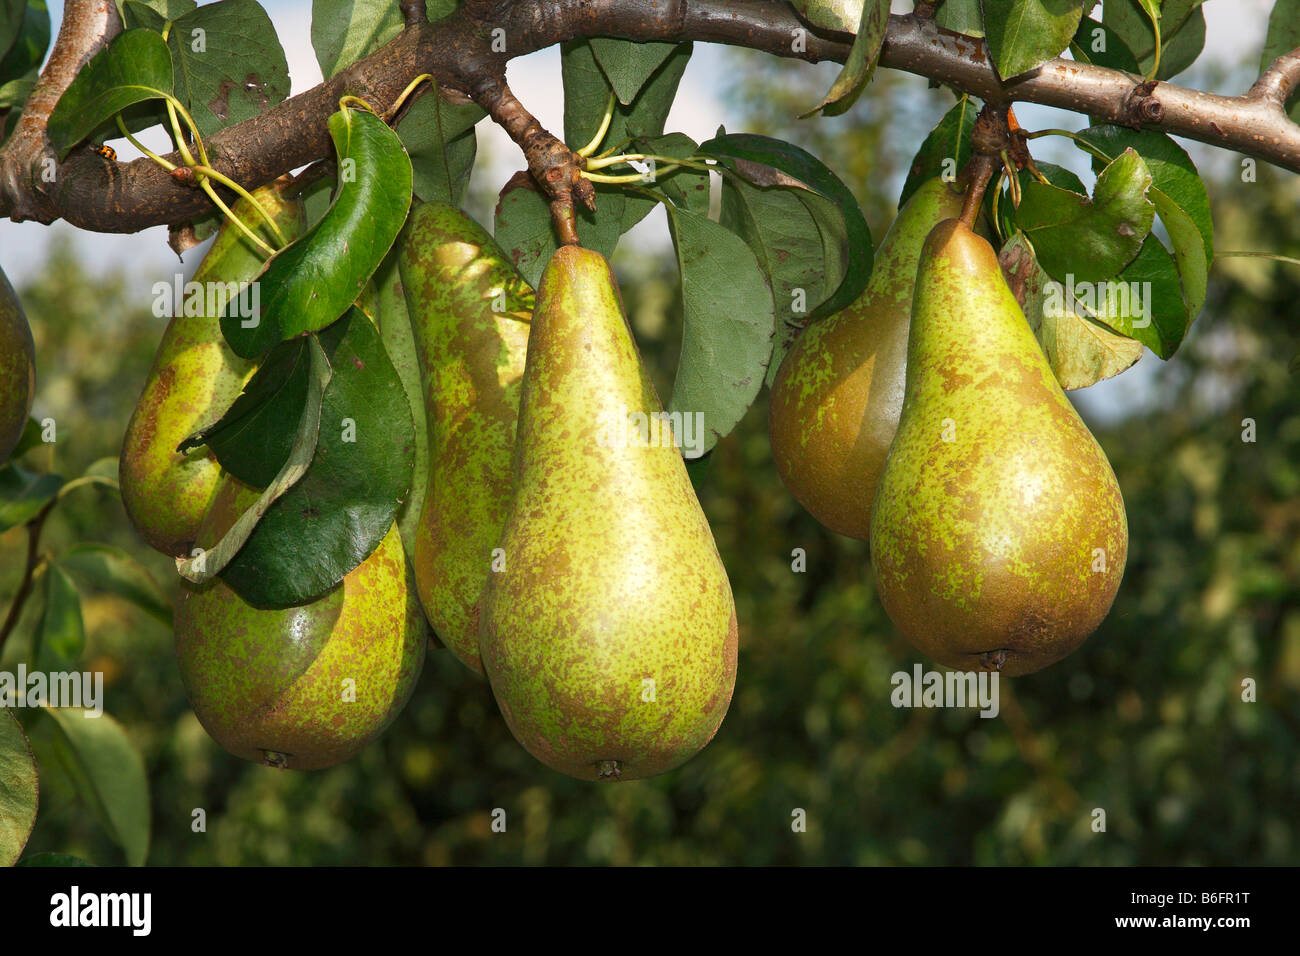 Pears on a pear tree (Pyrus communis cultivar), Altes Land fruit growing area, Lower Saxony, Germany, Europe Stock Photo